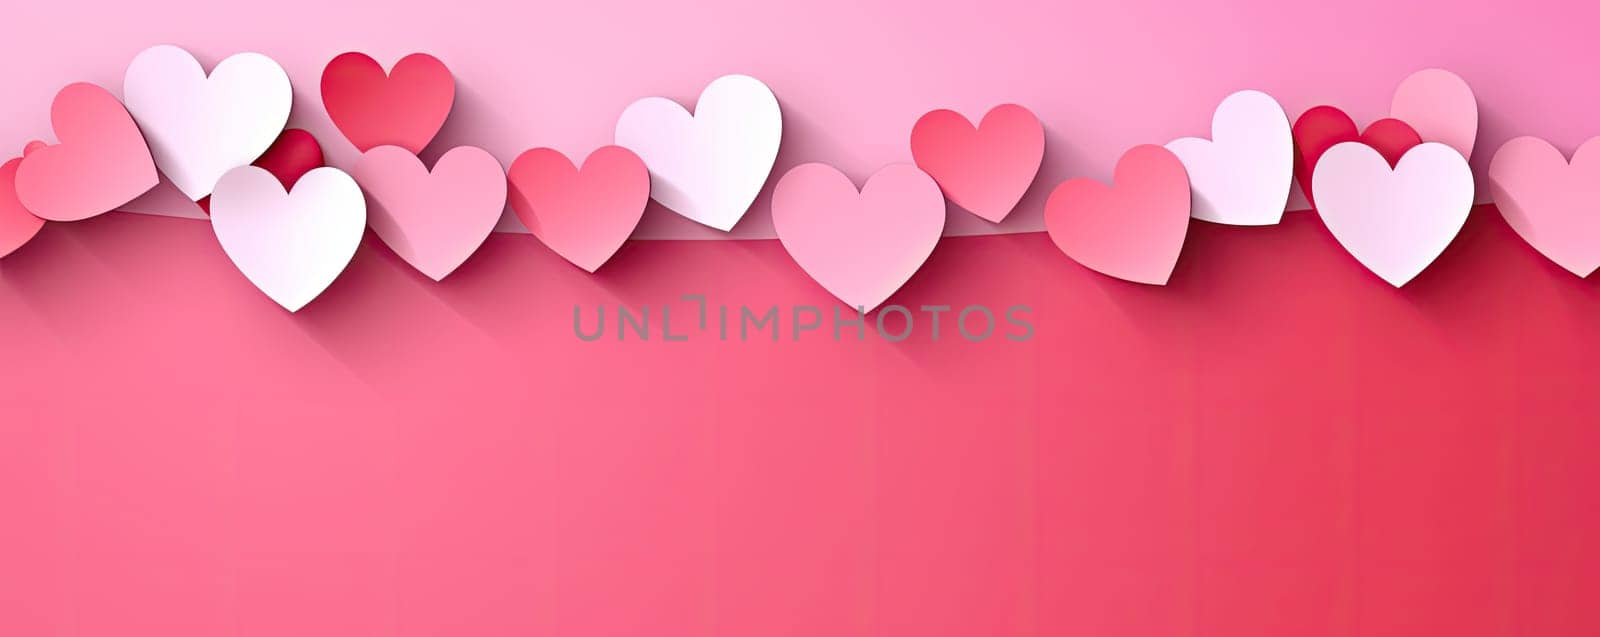 Pink hearts on a bright pink background, a symbol of love and romance by Yurich32